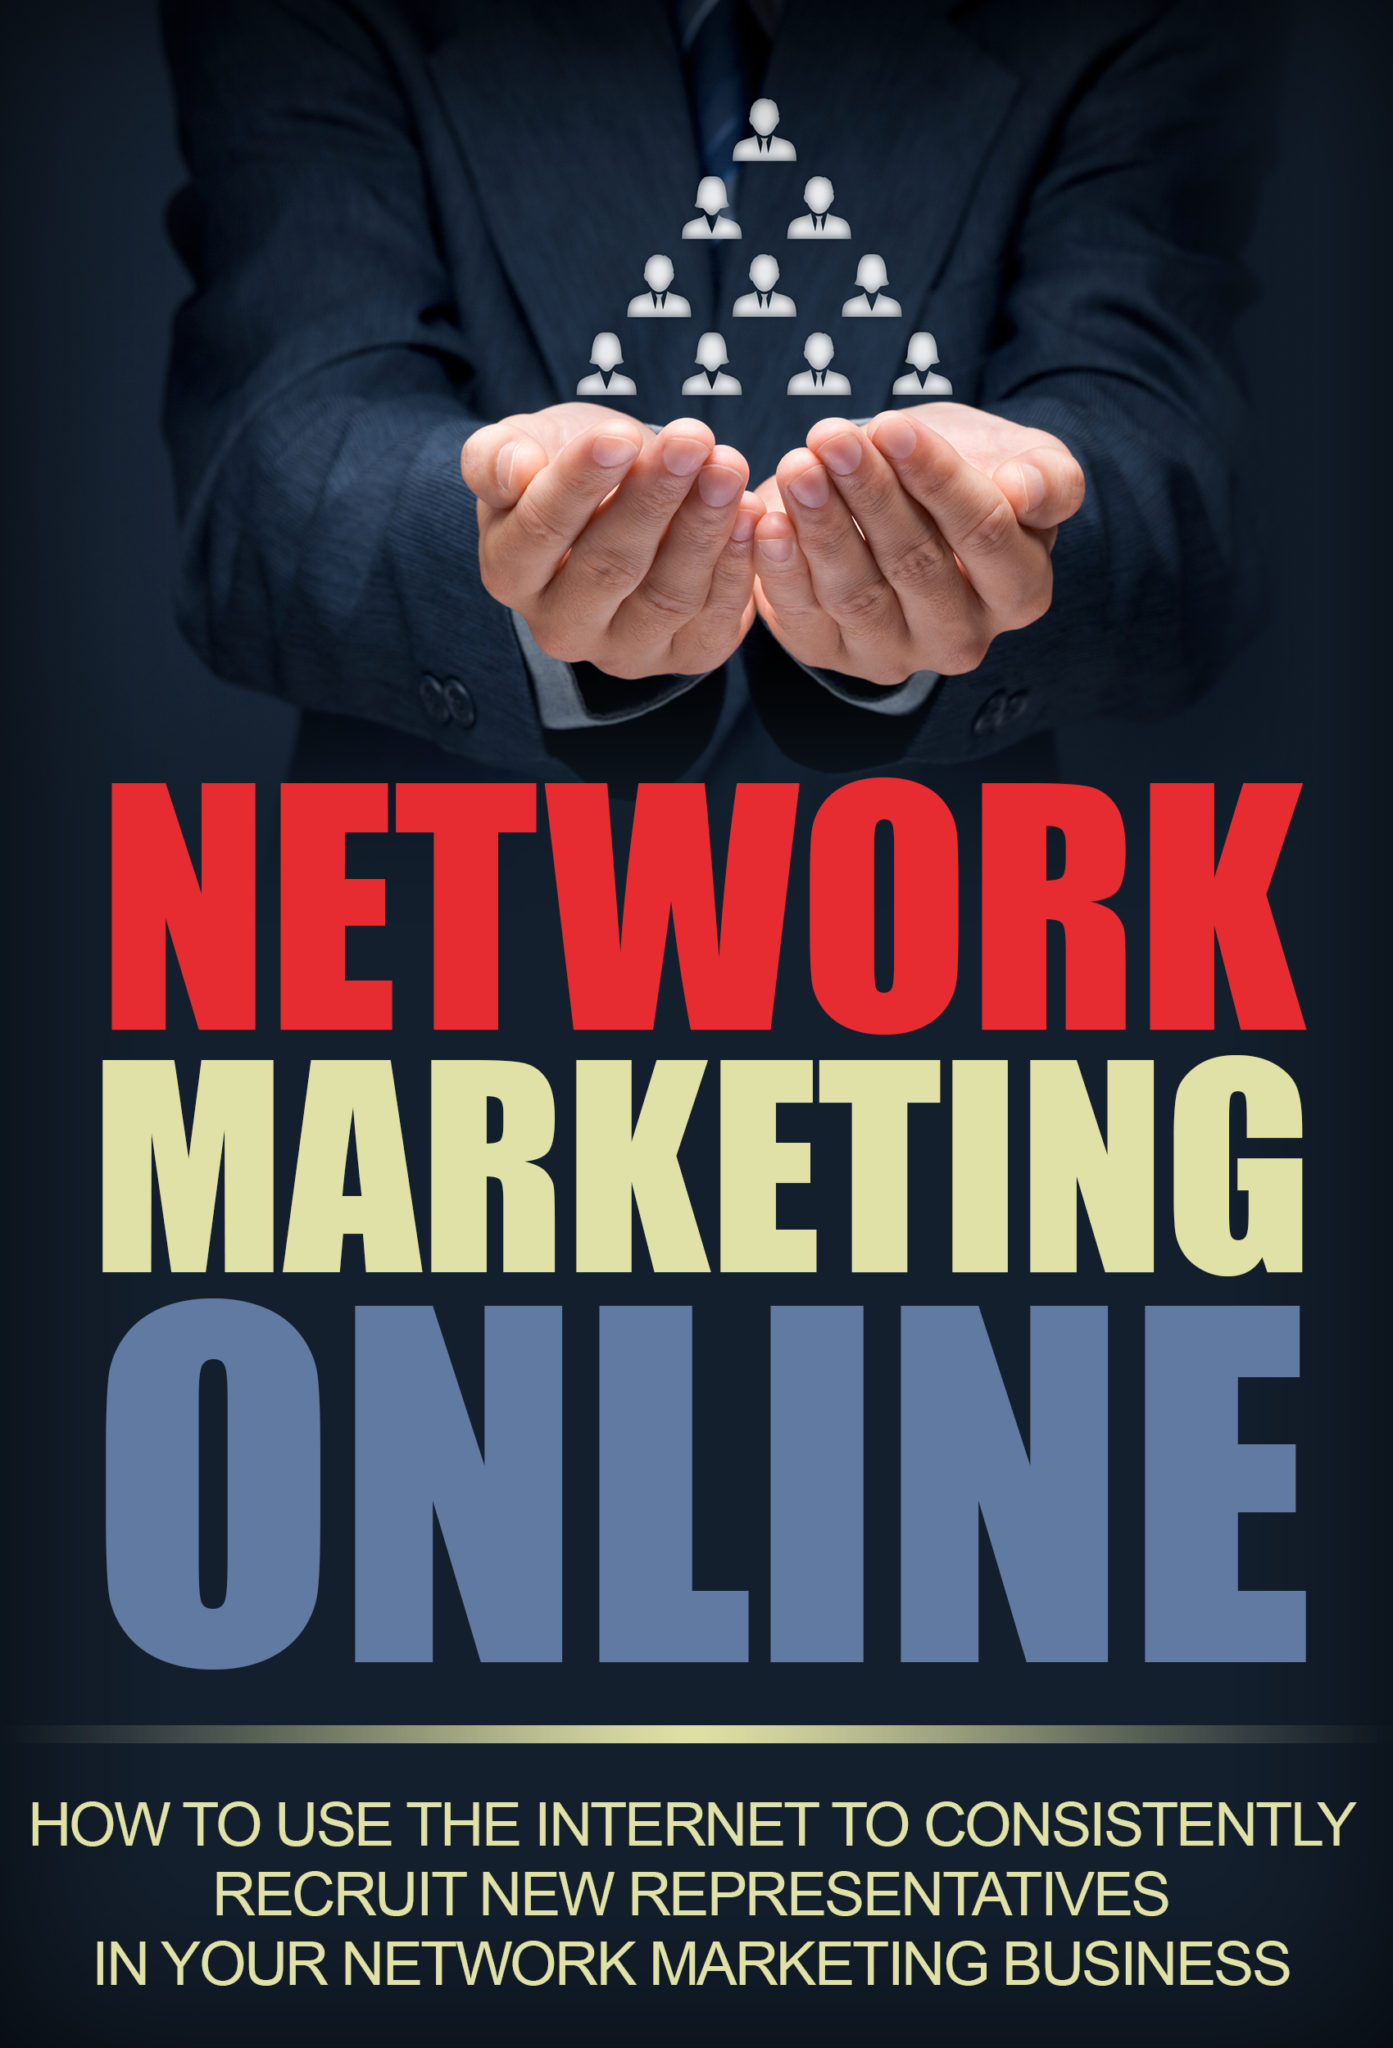 FREE: MLM: Network Marketing Online Make Money on the Internet with Consistent Network Marketing Recruiting In Your Network Marketing Business by Brent R